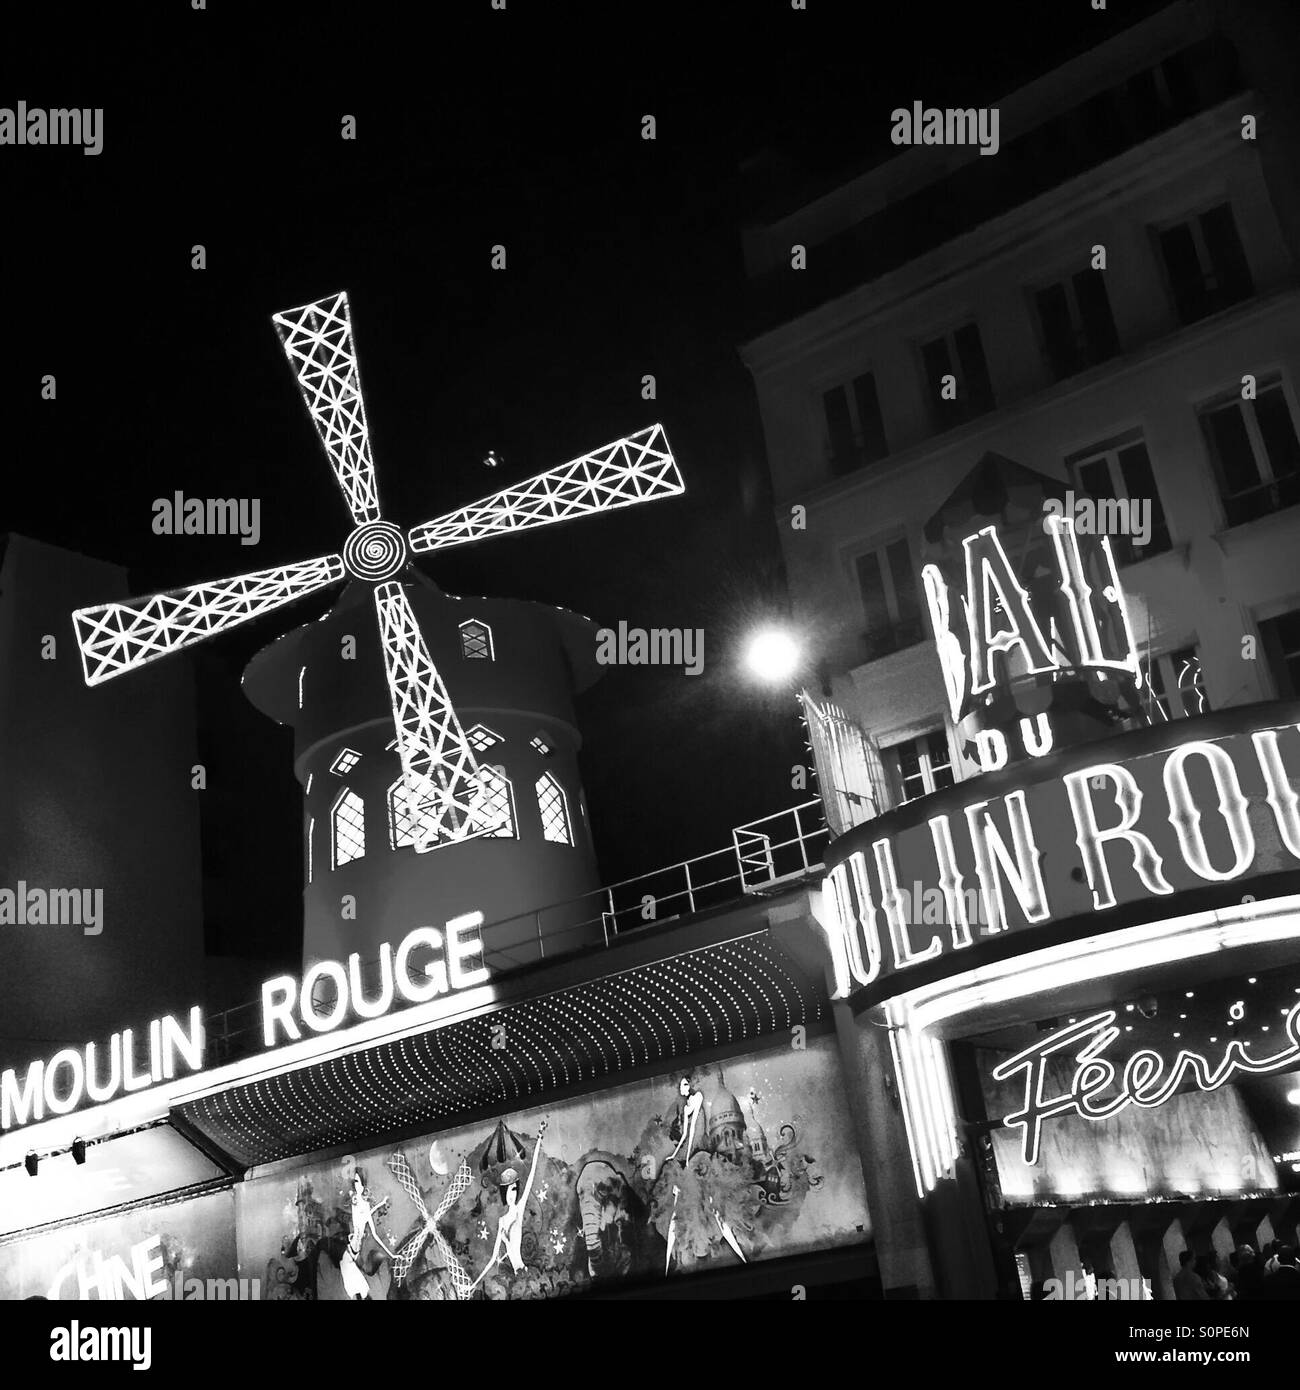 Moulin Rouge in Paris at night Stock Photo